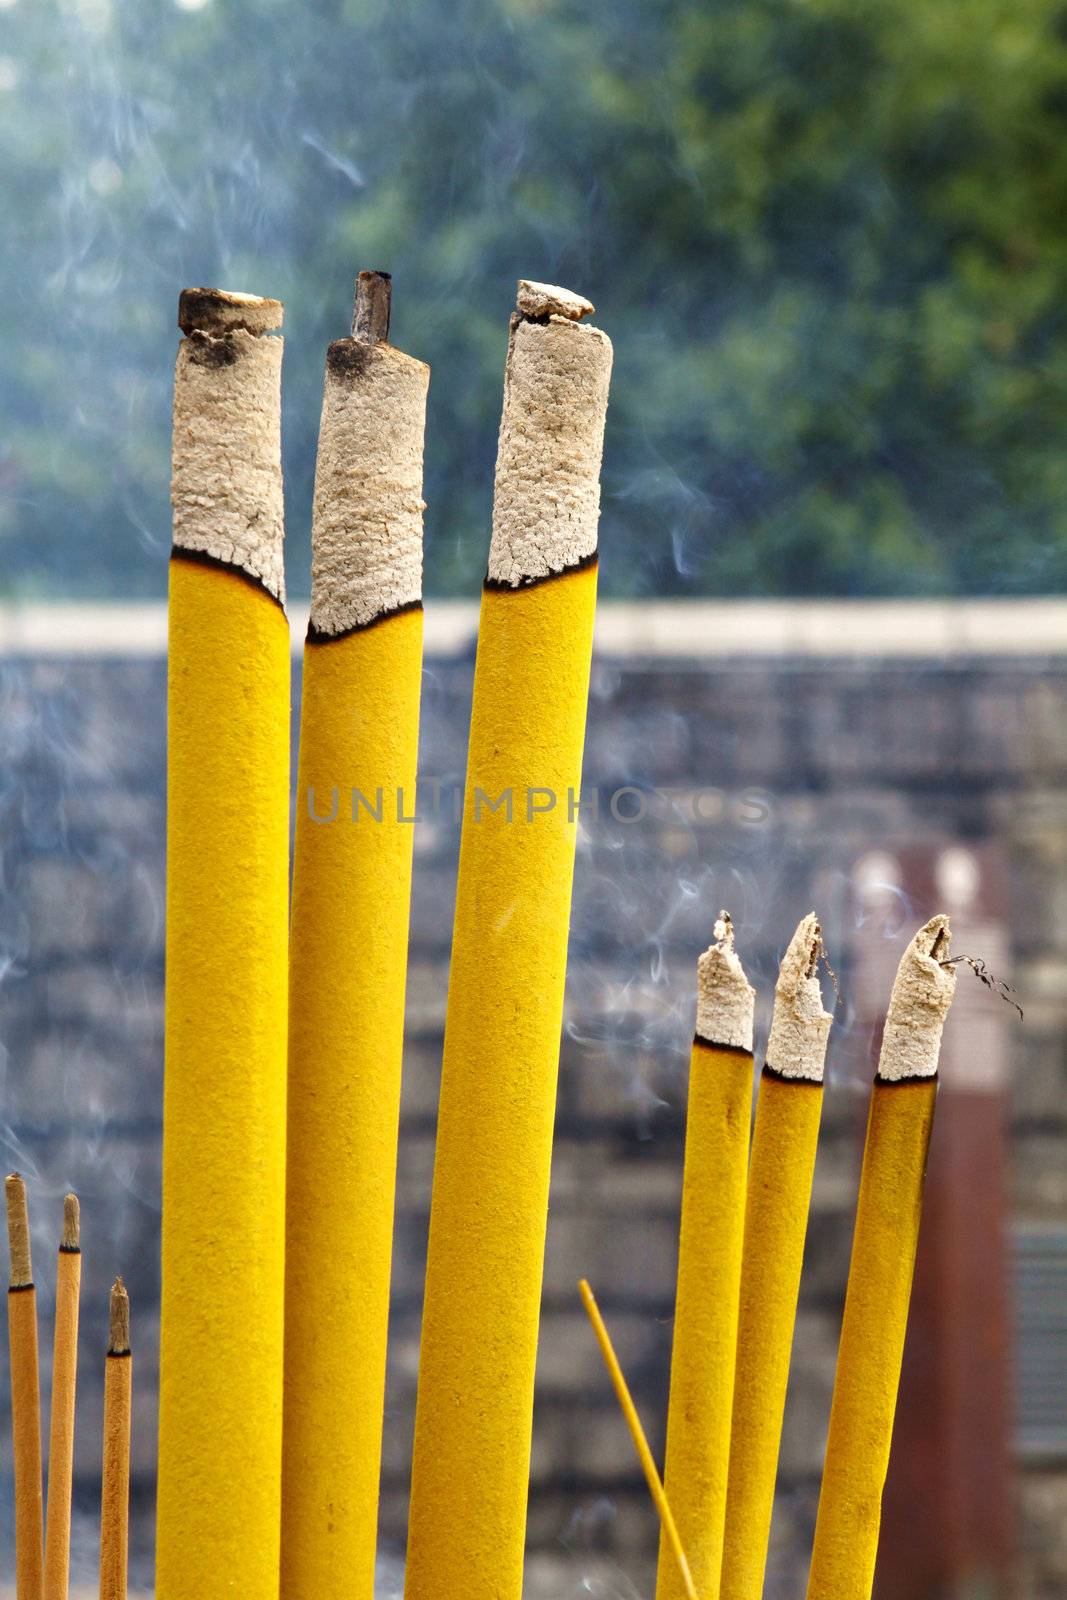 Incenses in a chinese temple by kawing921